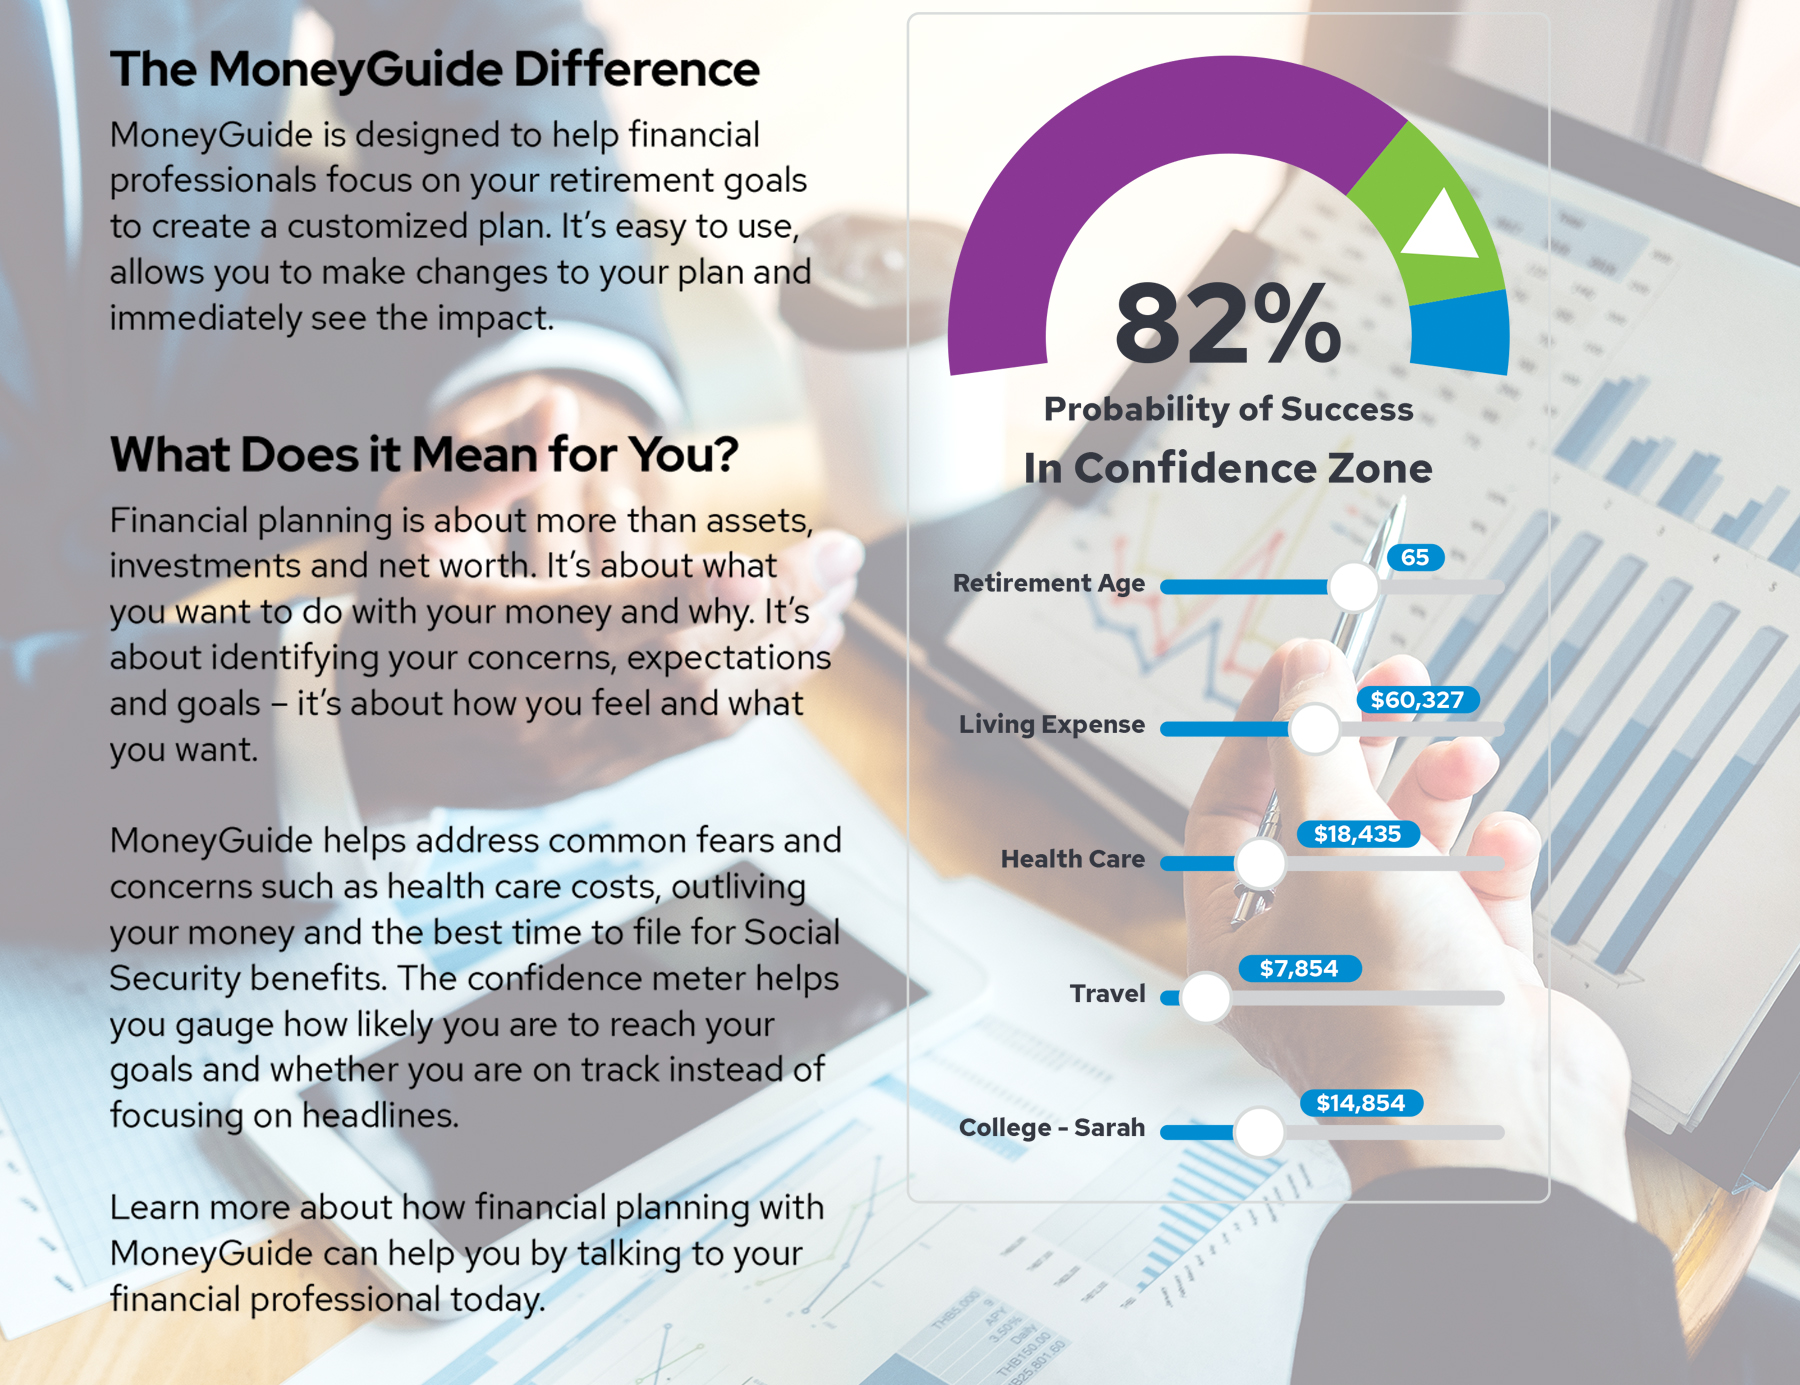 Money Guide Pro infographic related to financial planning.